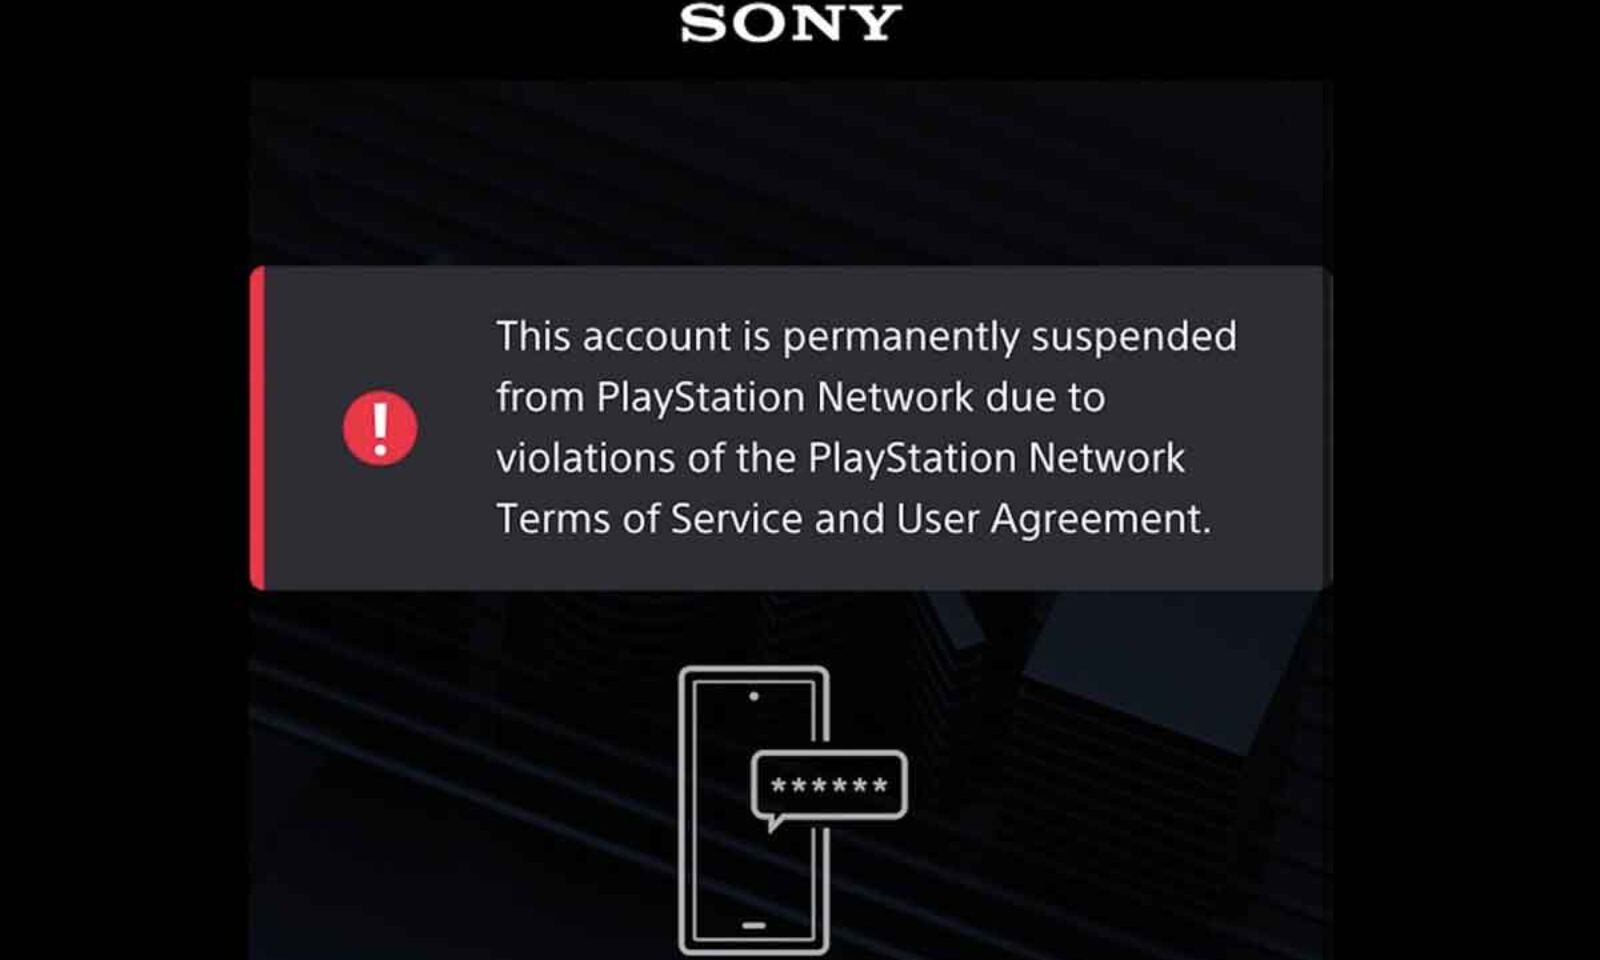 Ban has no limits: Sony is randomly shutting users out of their